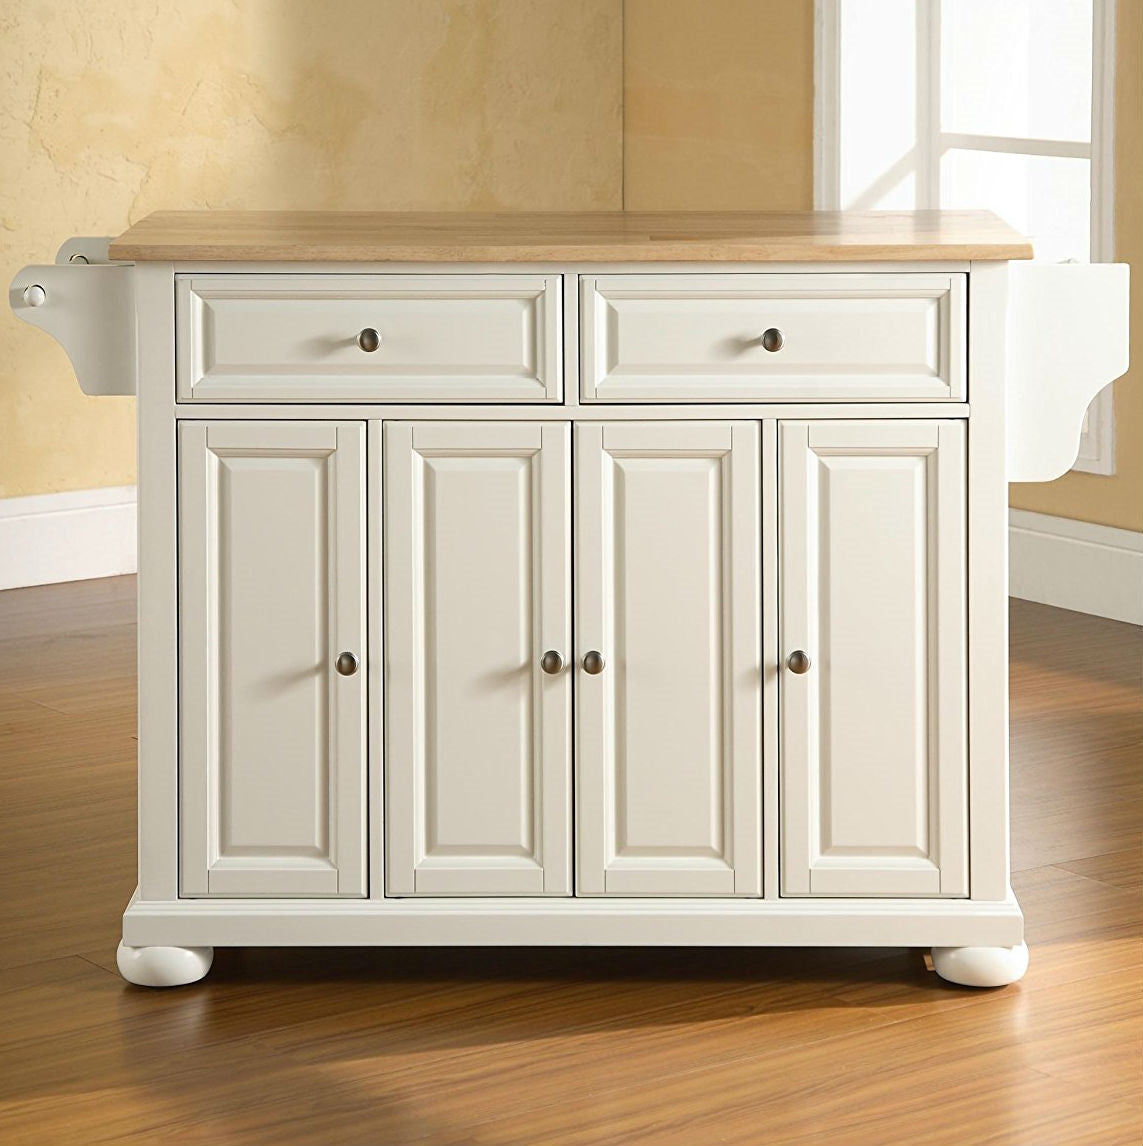 Kitchen > Utility Tables & Workbenches - White Kitchen Island Storage Cabinet With Solid Wood Top